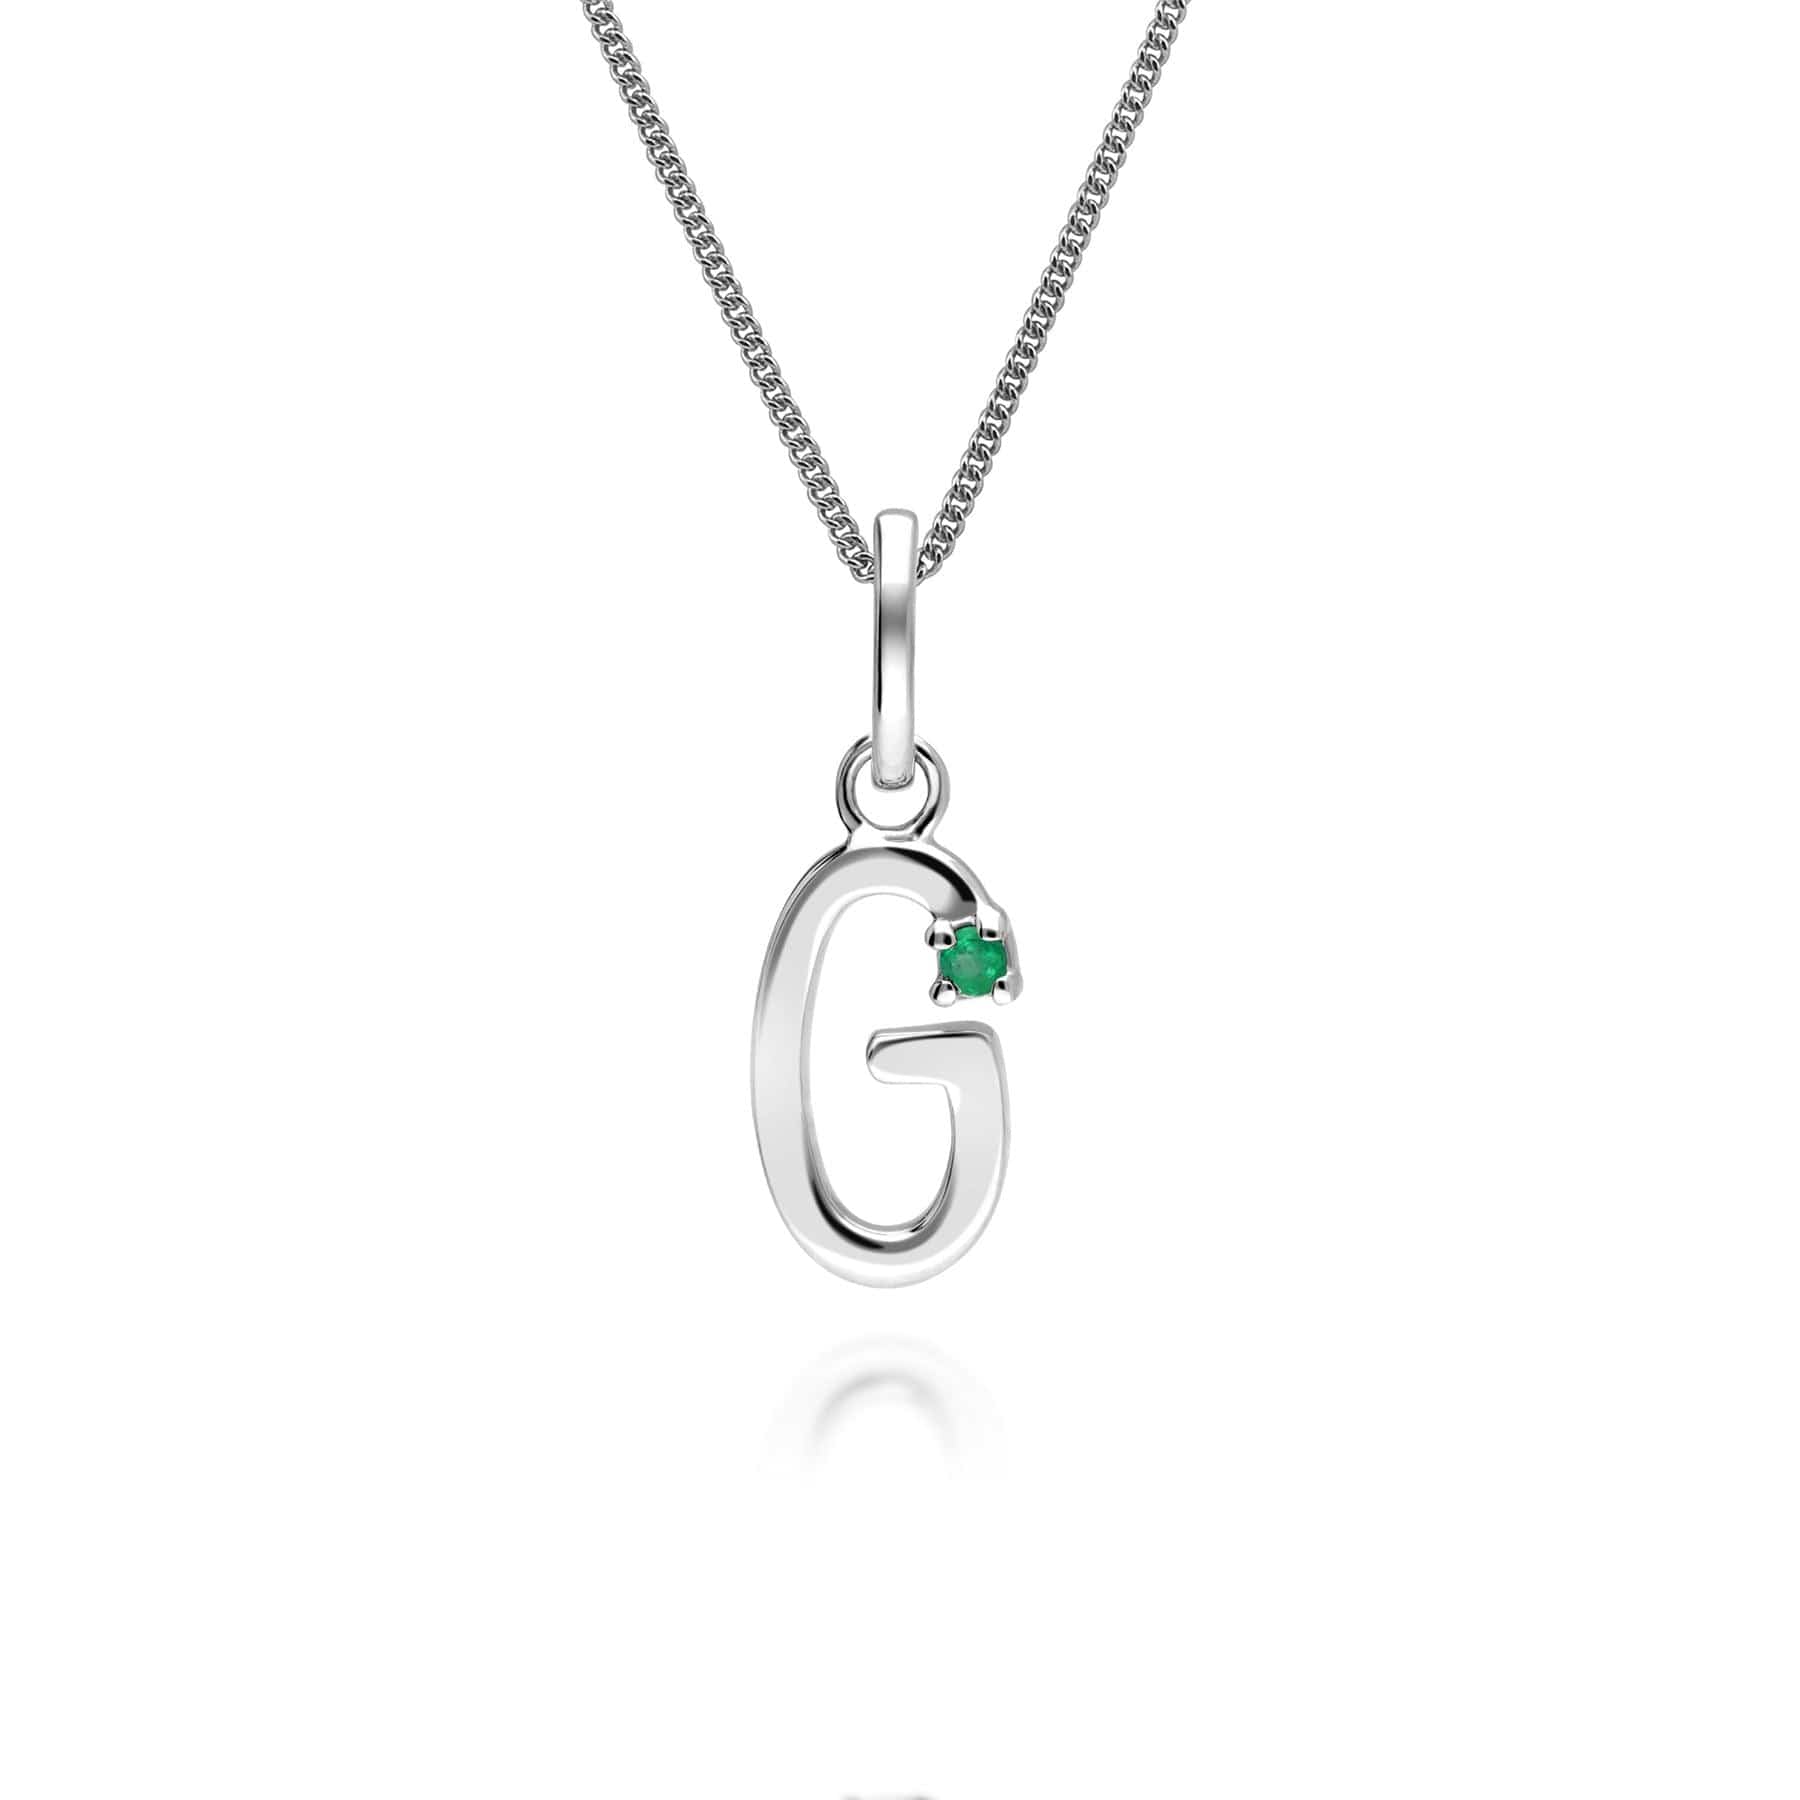 162P0247019 Initial Emerald Letter Charm Necklace in 9ct White Gold 8